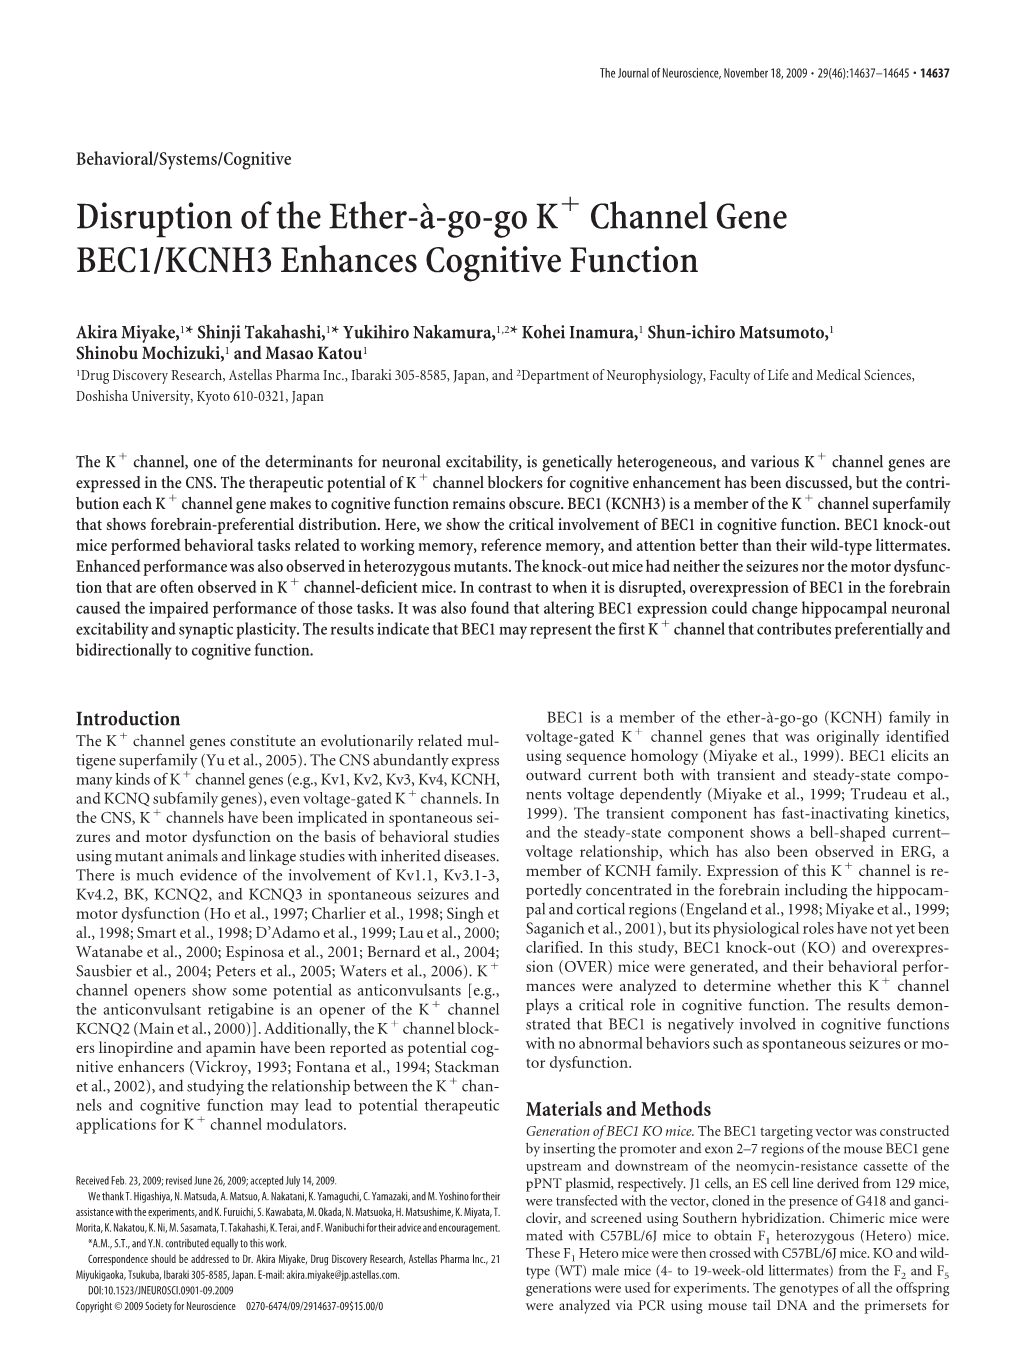 Disruption of the Ether-A`-Go-Go K Channel Gene BEC1/KCNH3